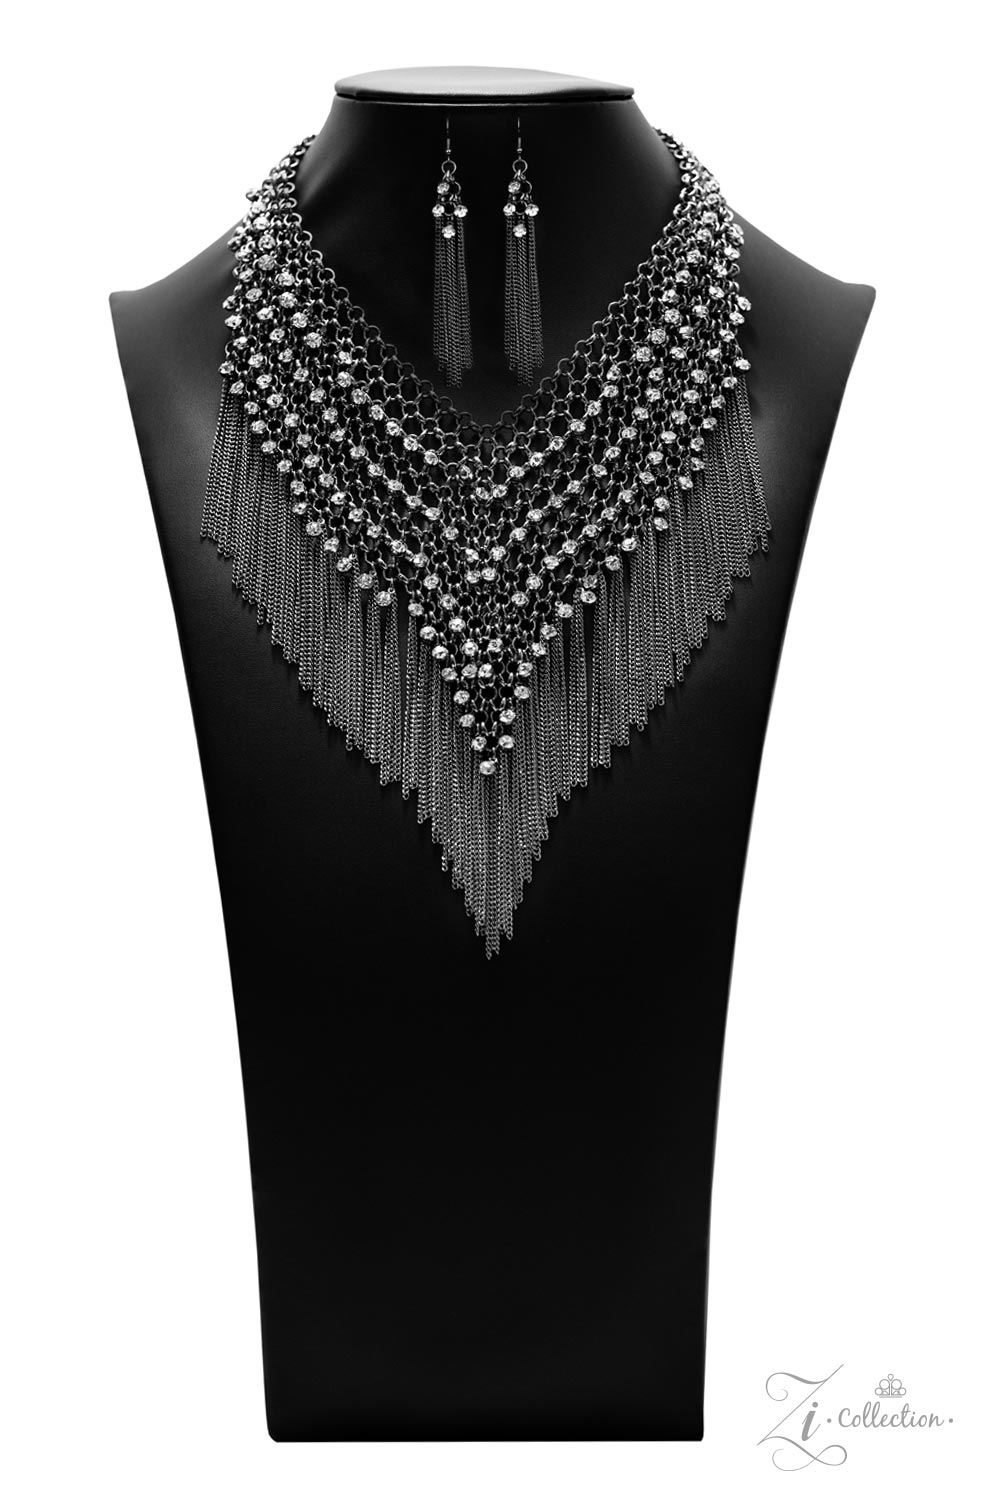 The Impulsive Zi Collection Necklace